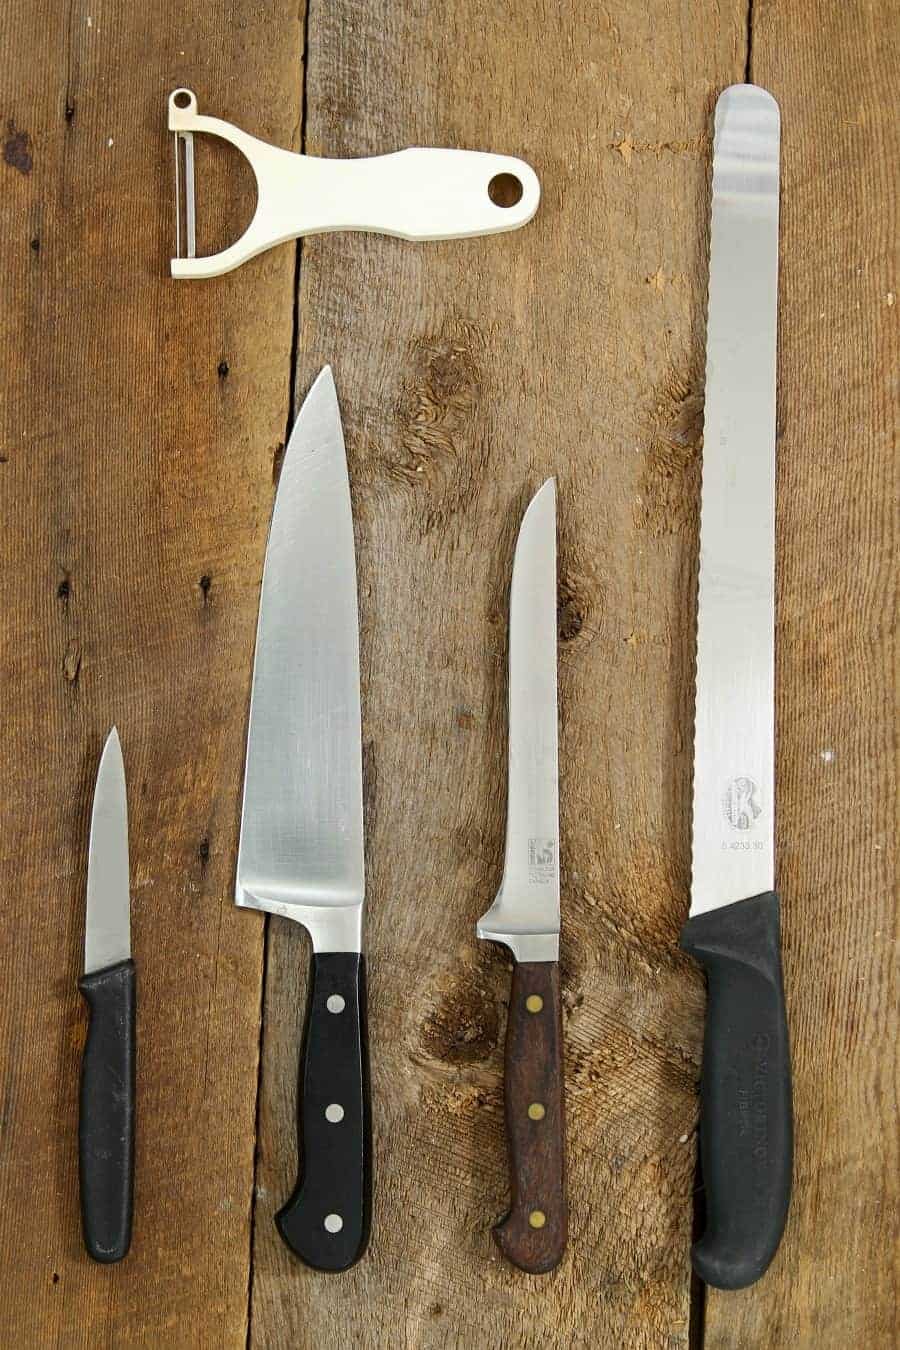 vertical image of a paring knife, chefs knife, boning knife, and serrated slicer on a wooden table top